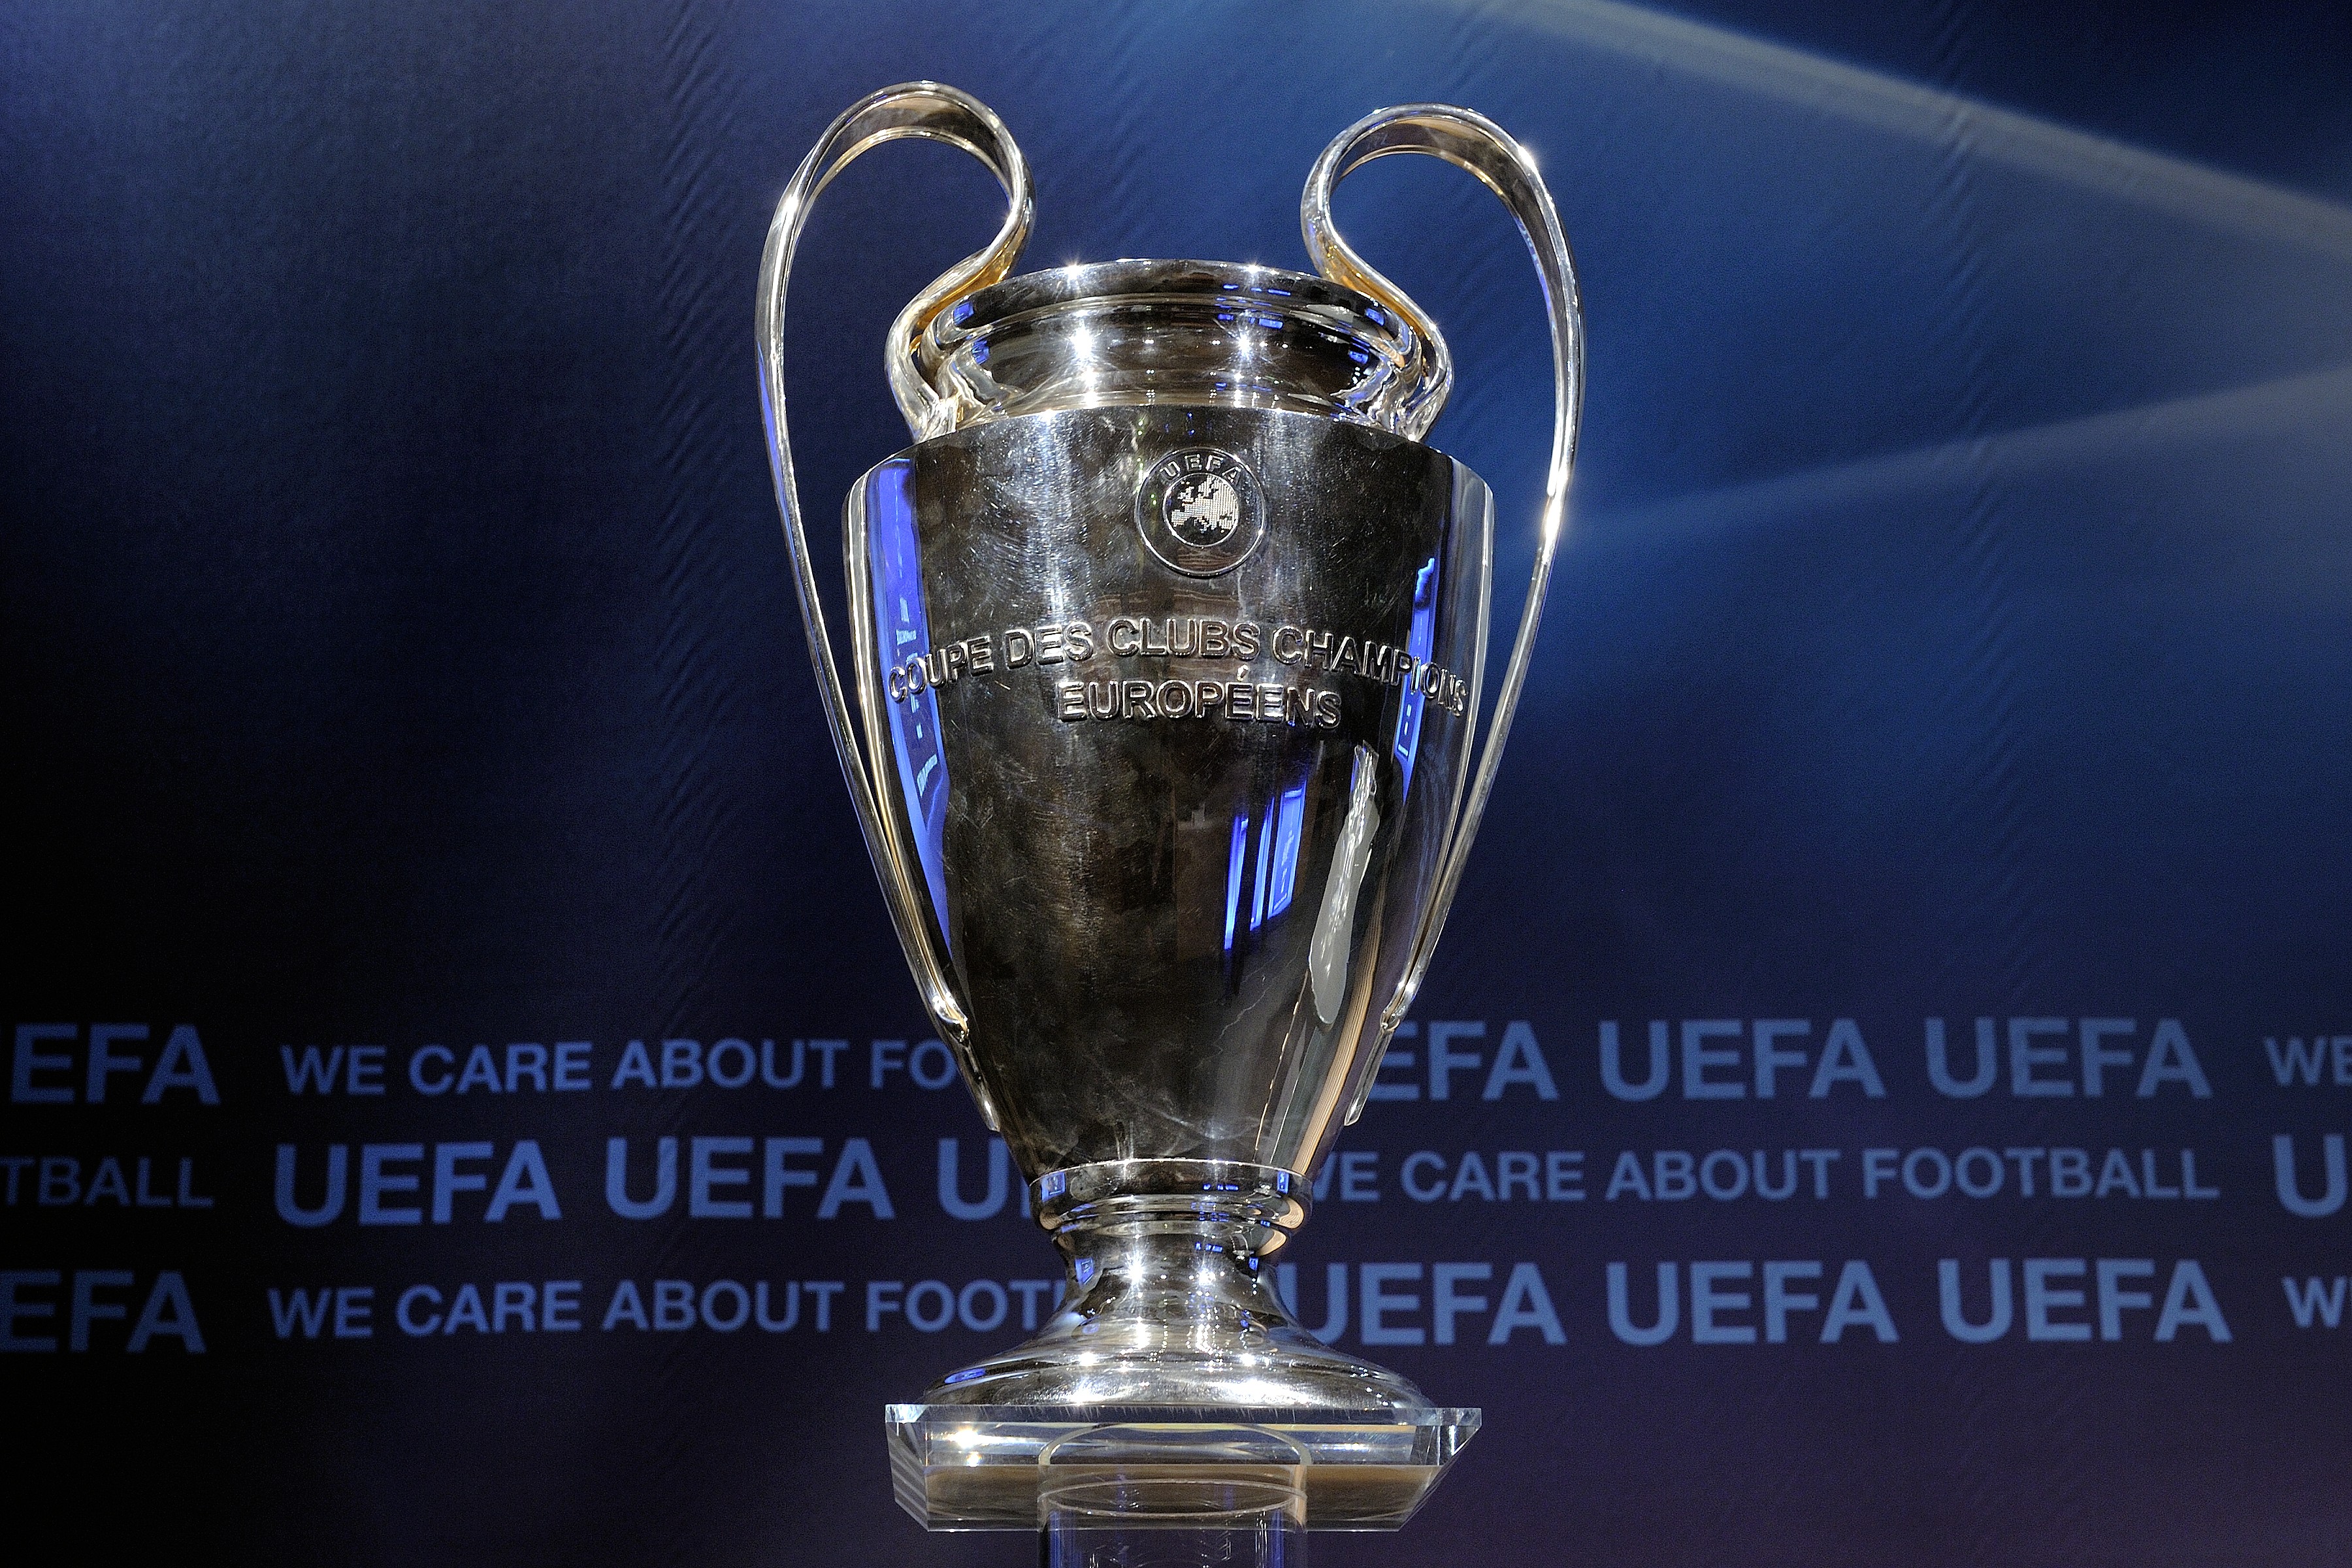 NYON, SWITZERLAND - AUGUST 06:  The UEFA Champions League trophy is displayed prior to the UEFA Champions League play-off draw on August 6, 2010 in Nyon, Switzerland. The play-offs are played over two legs on 17/18 and 24/25 August. The ten play-off winne